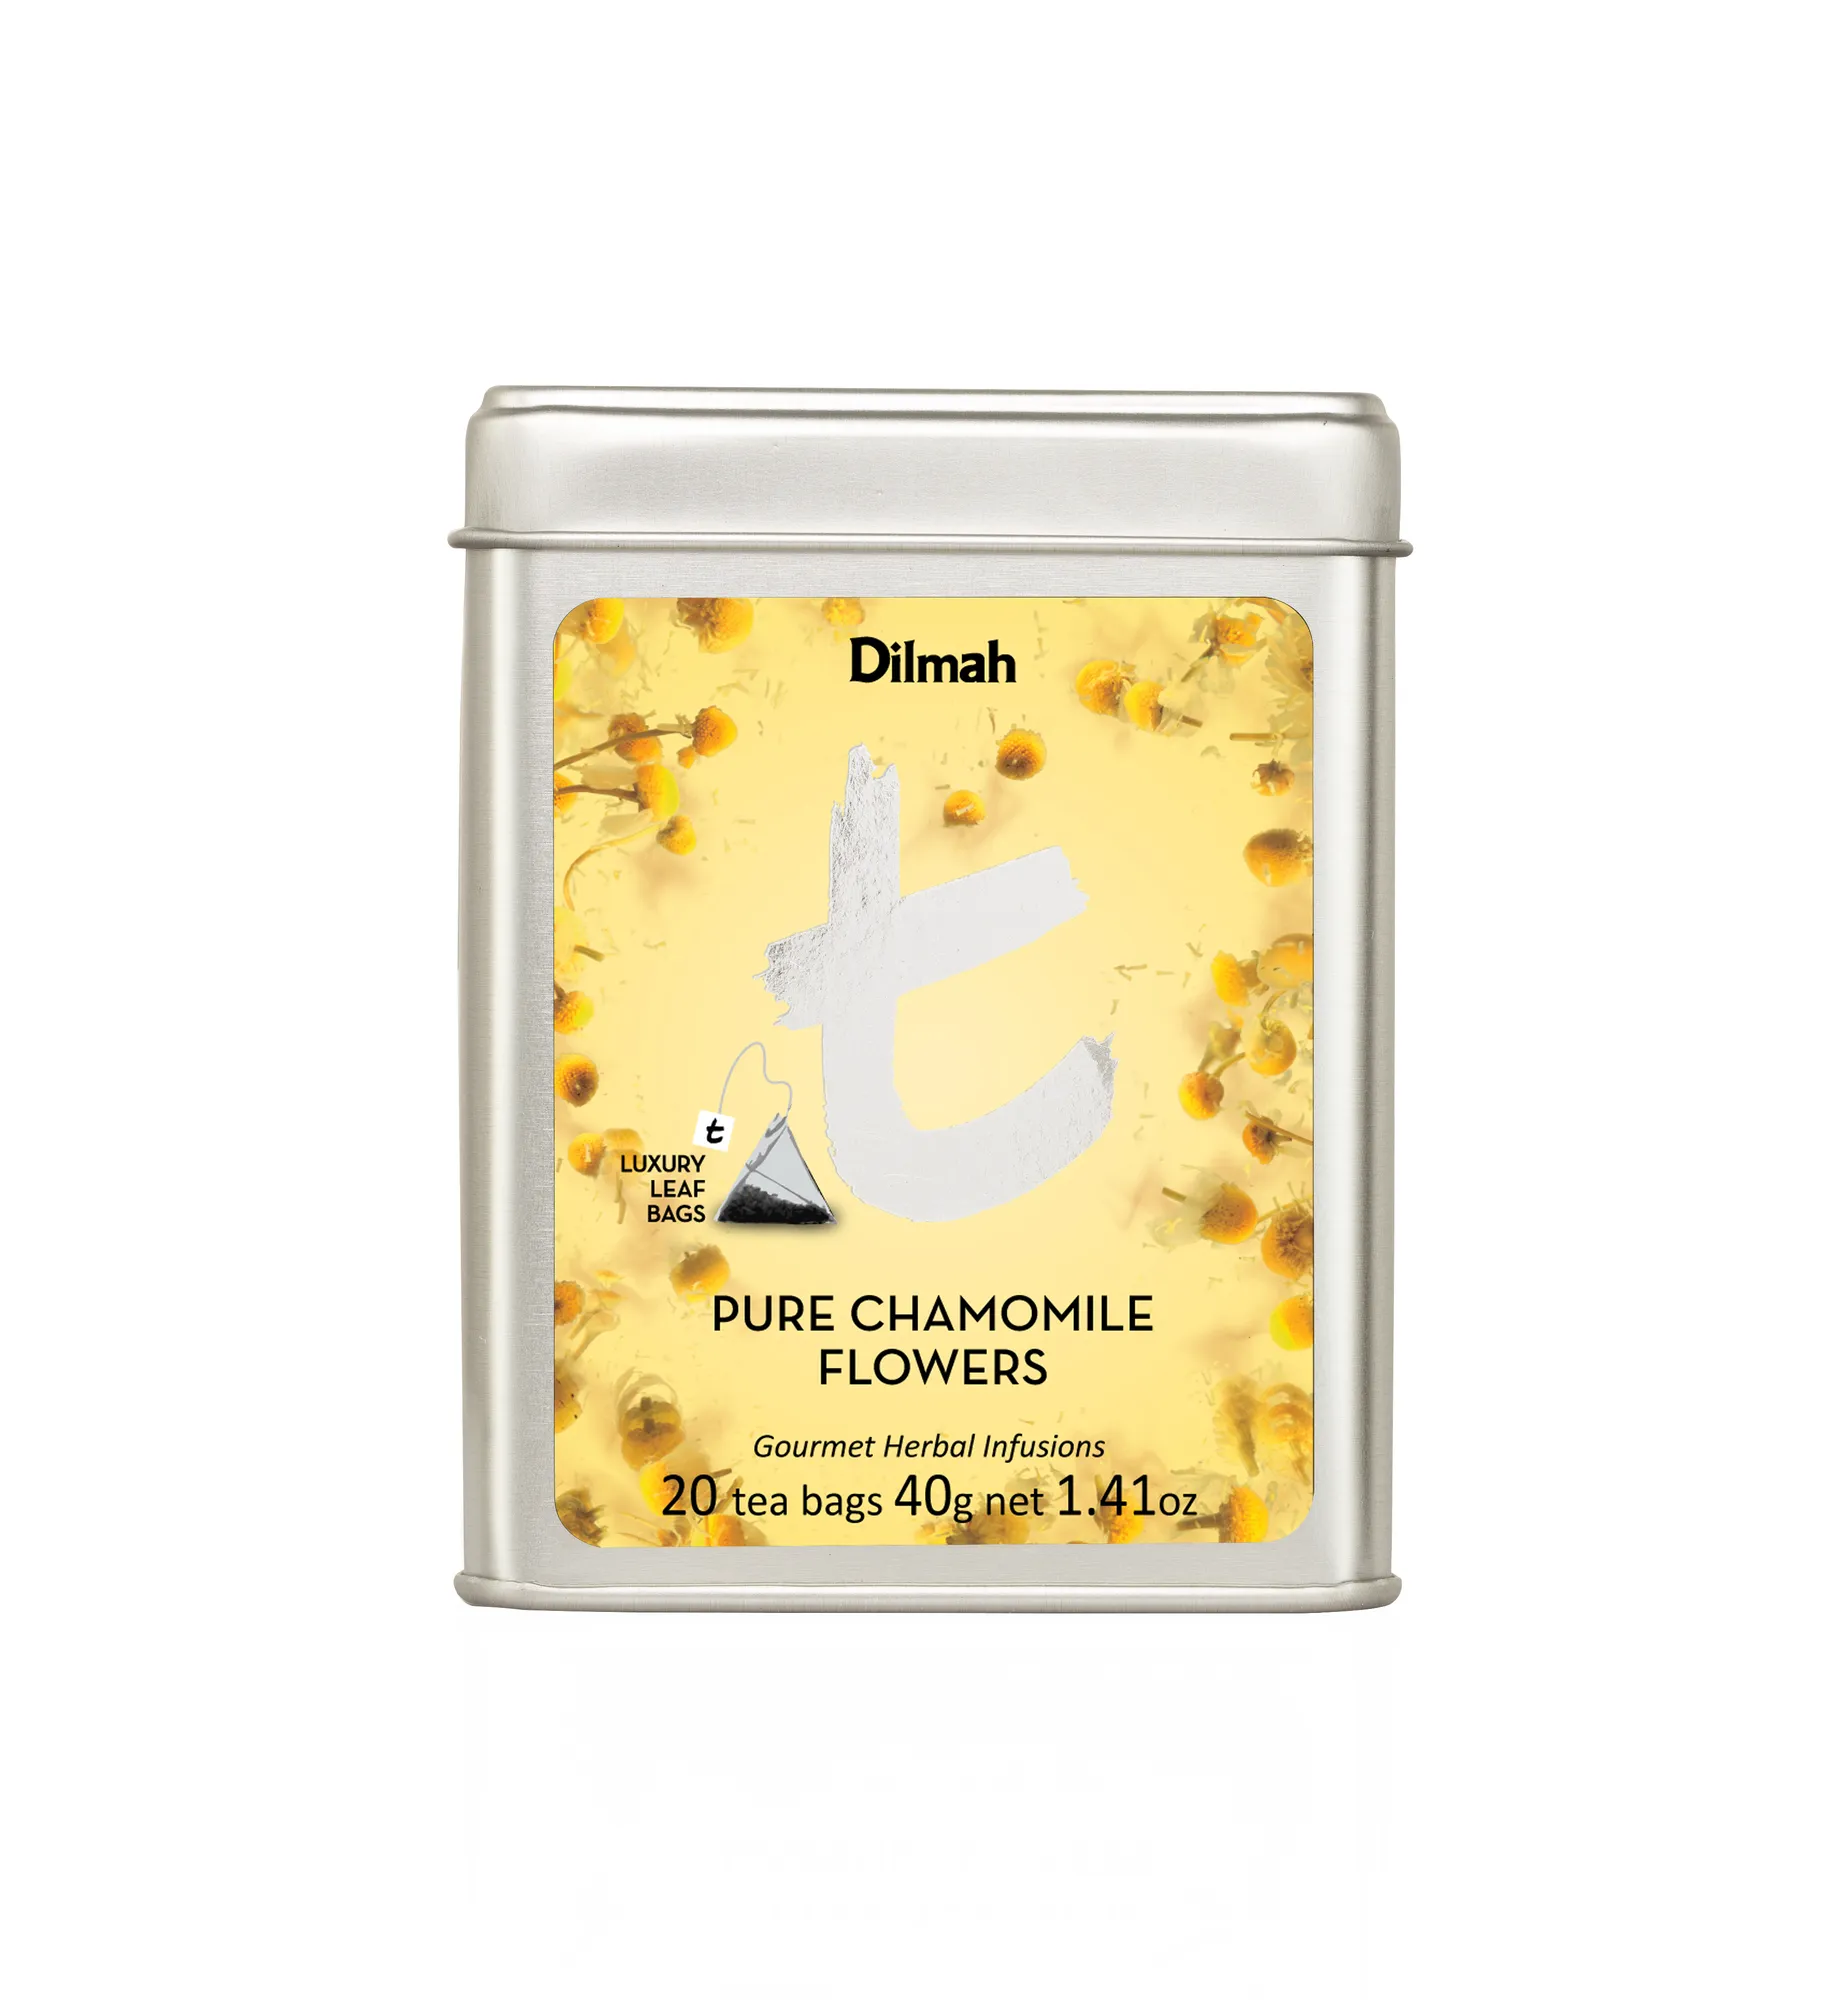 20 tea bags of Pure Chamomile Flowers in tin